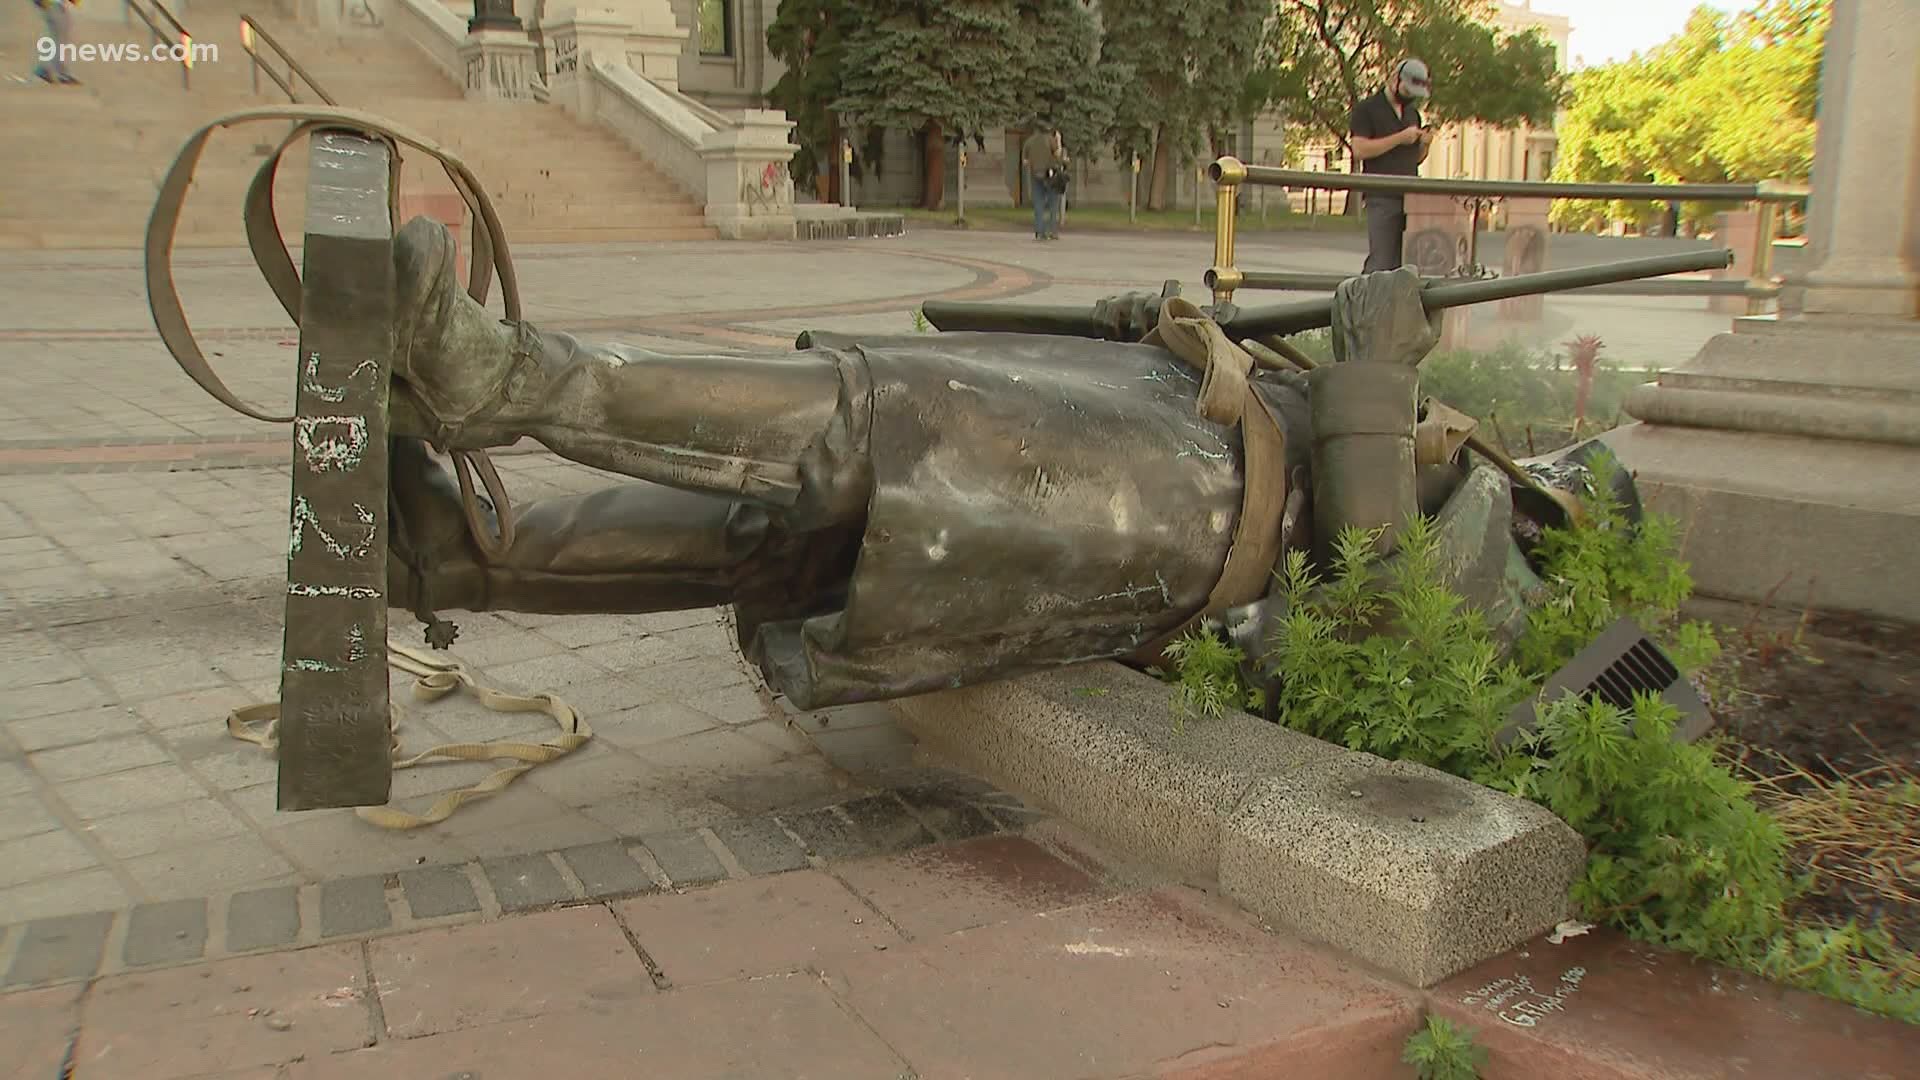 The monument depicts a Civil War cavalryman and honors Colorado soldiers who fought and died in the Civil War, according to the city's website.